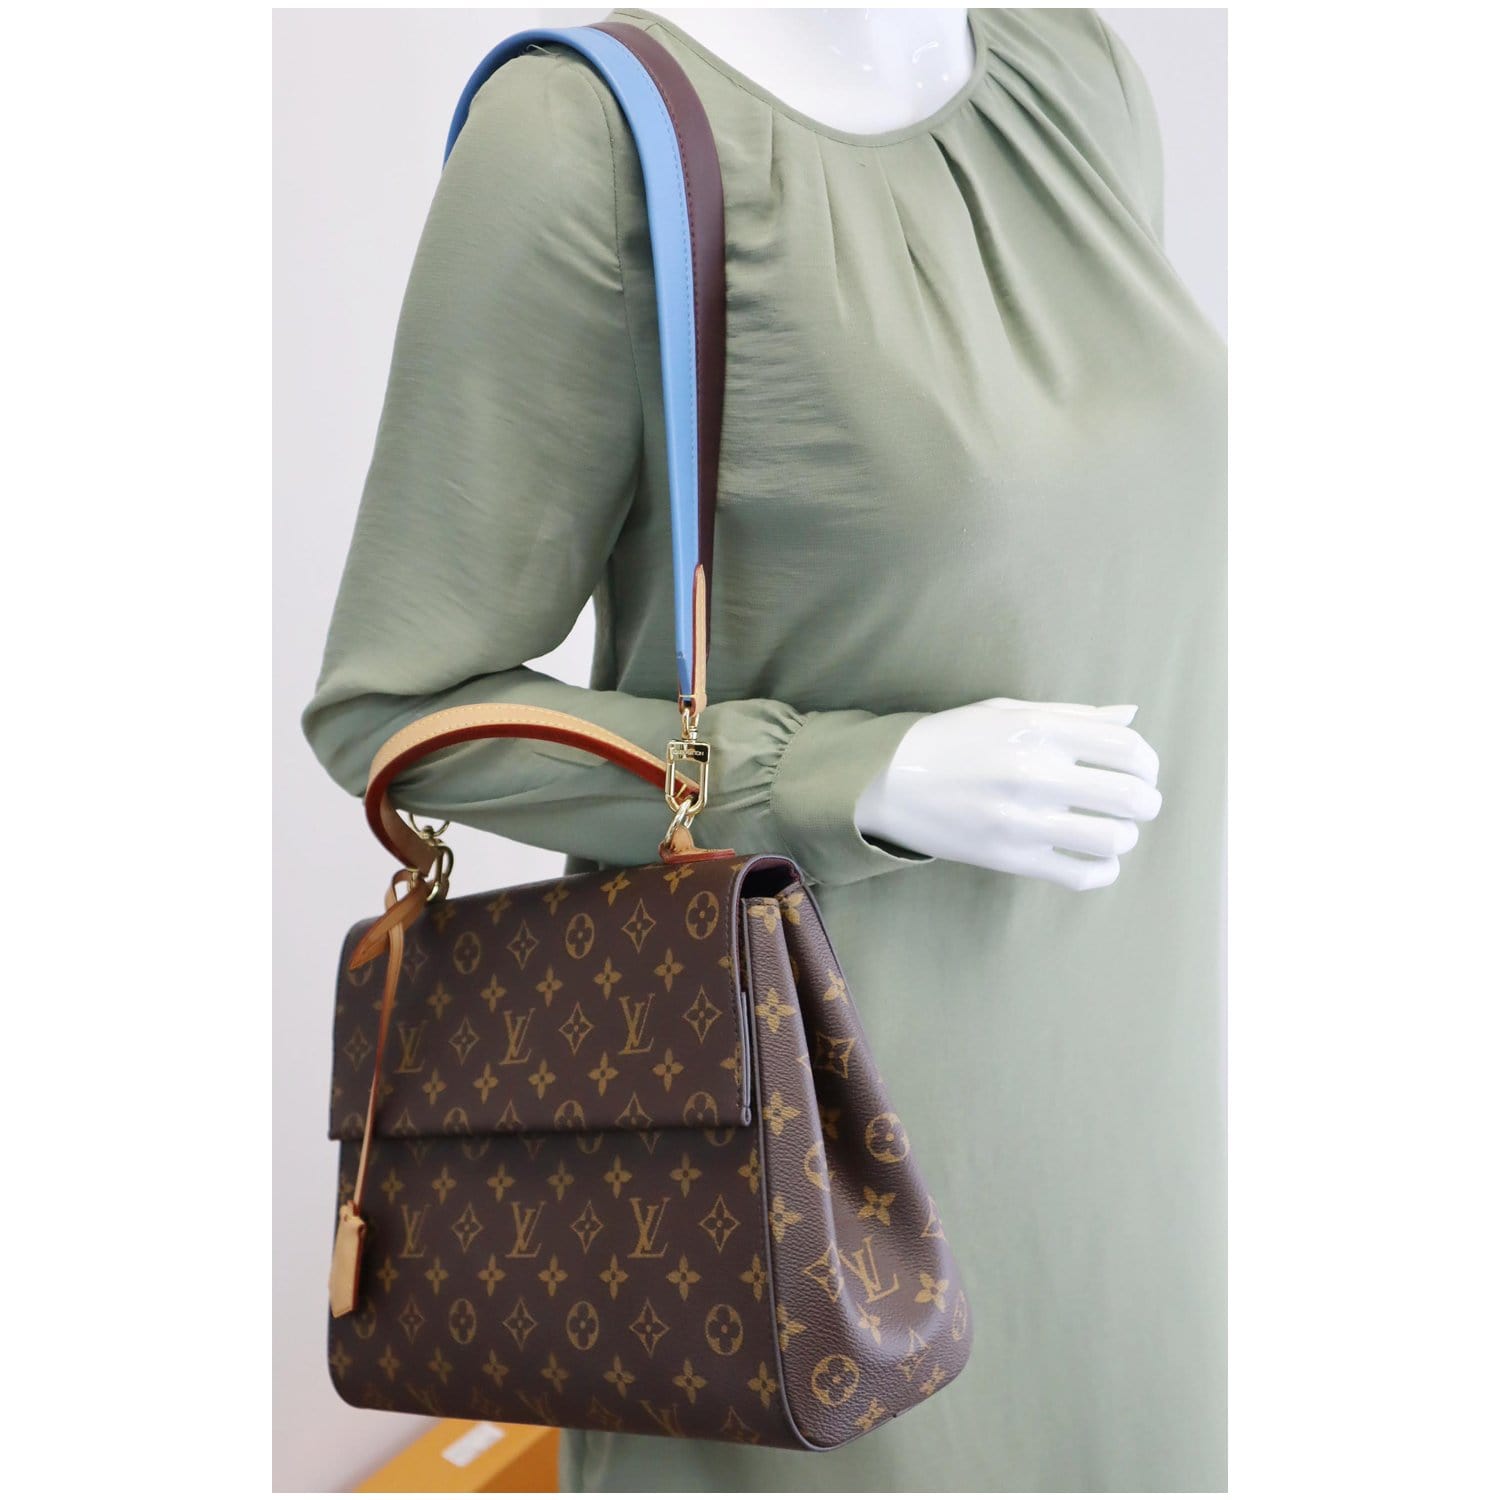 Buy Pre-Owned LOUIS VUITTON Cluny MM Monogram Canvas